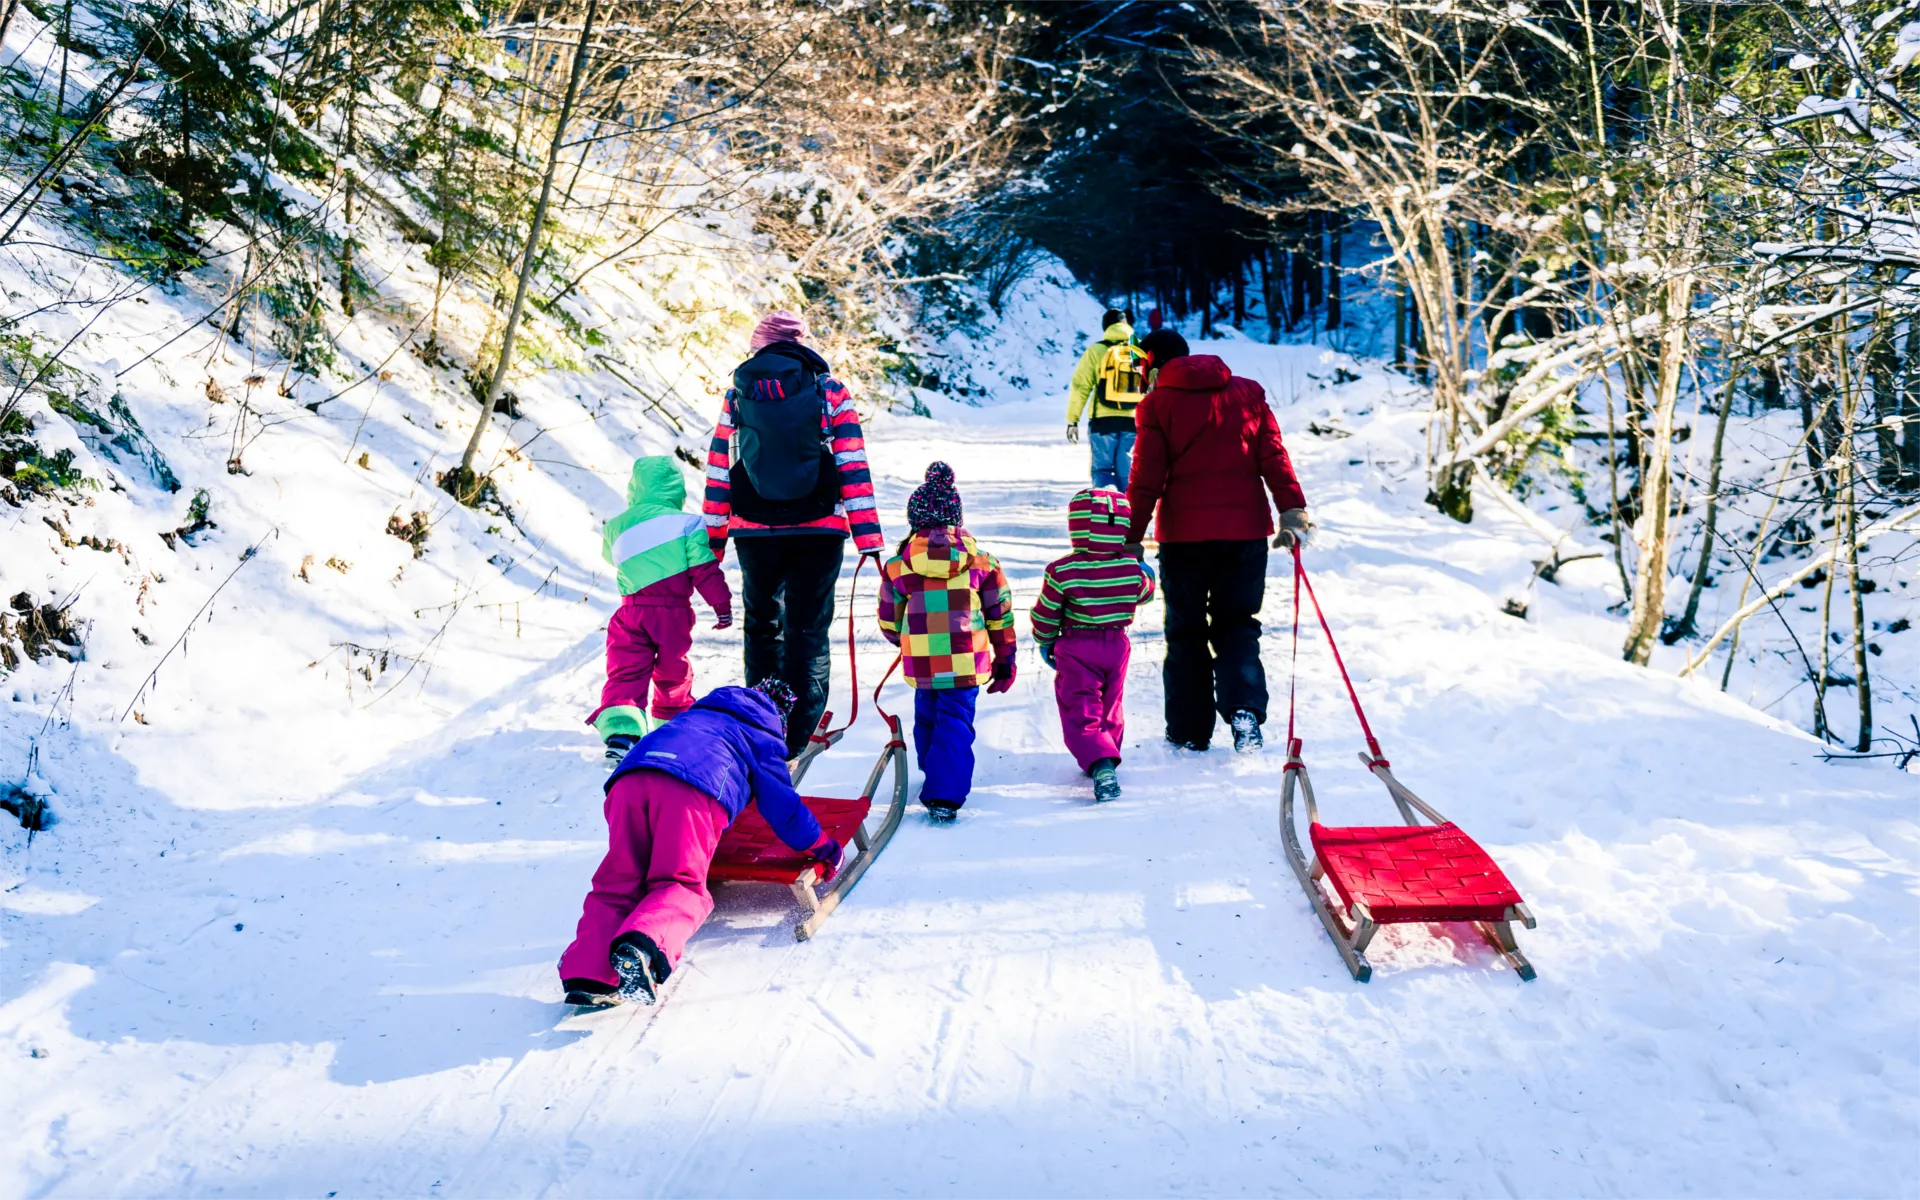 Winter Activities That Will Increase Your Heart Rate